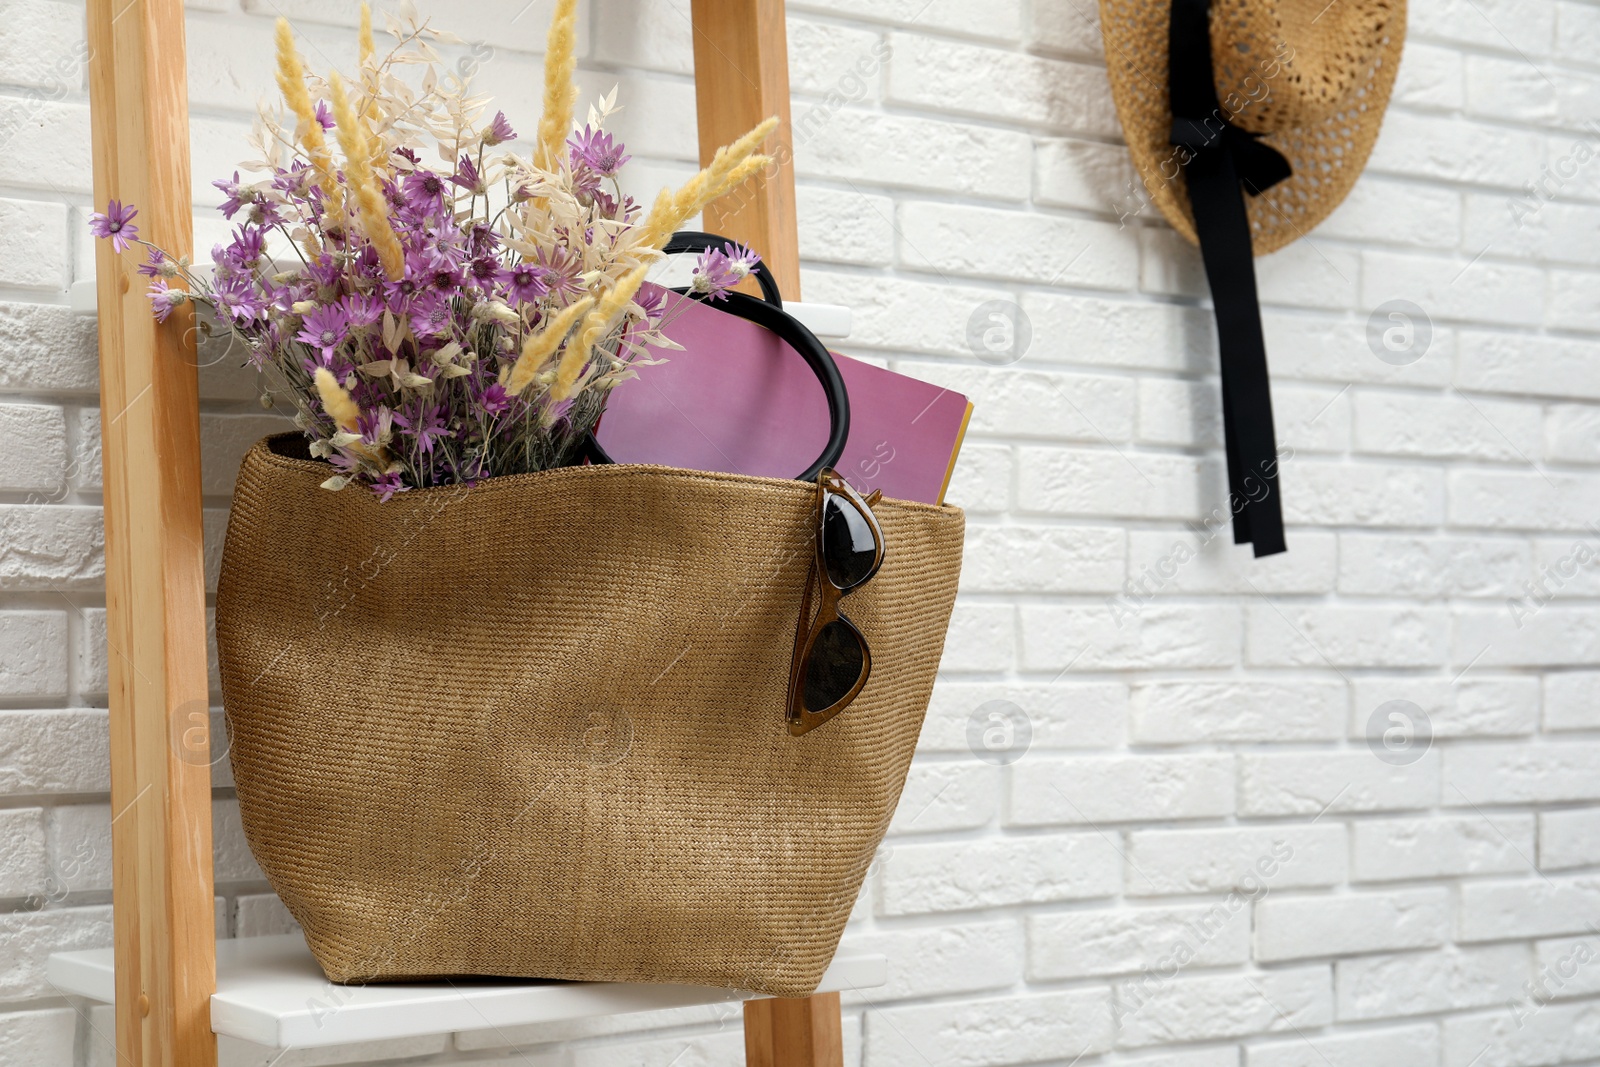 Photo of Stylish beach bag with beautiful bouquet of wildflowers, sunglasses and magazines on shelf indoors. Space for text